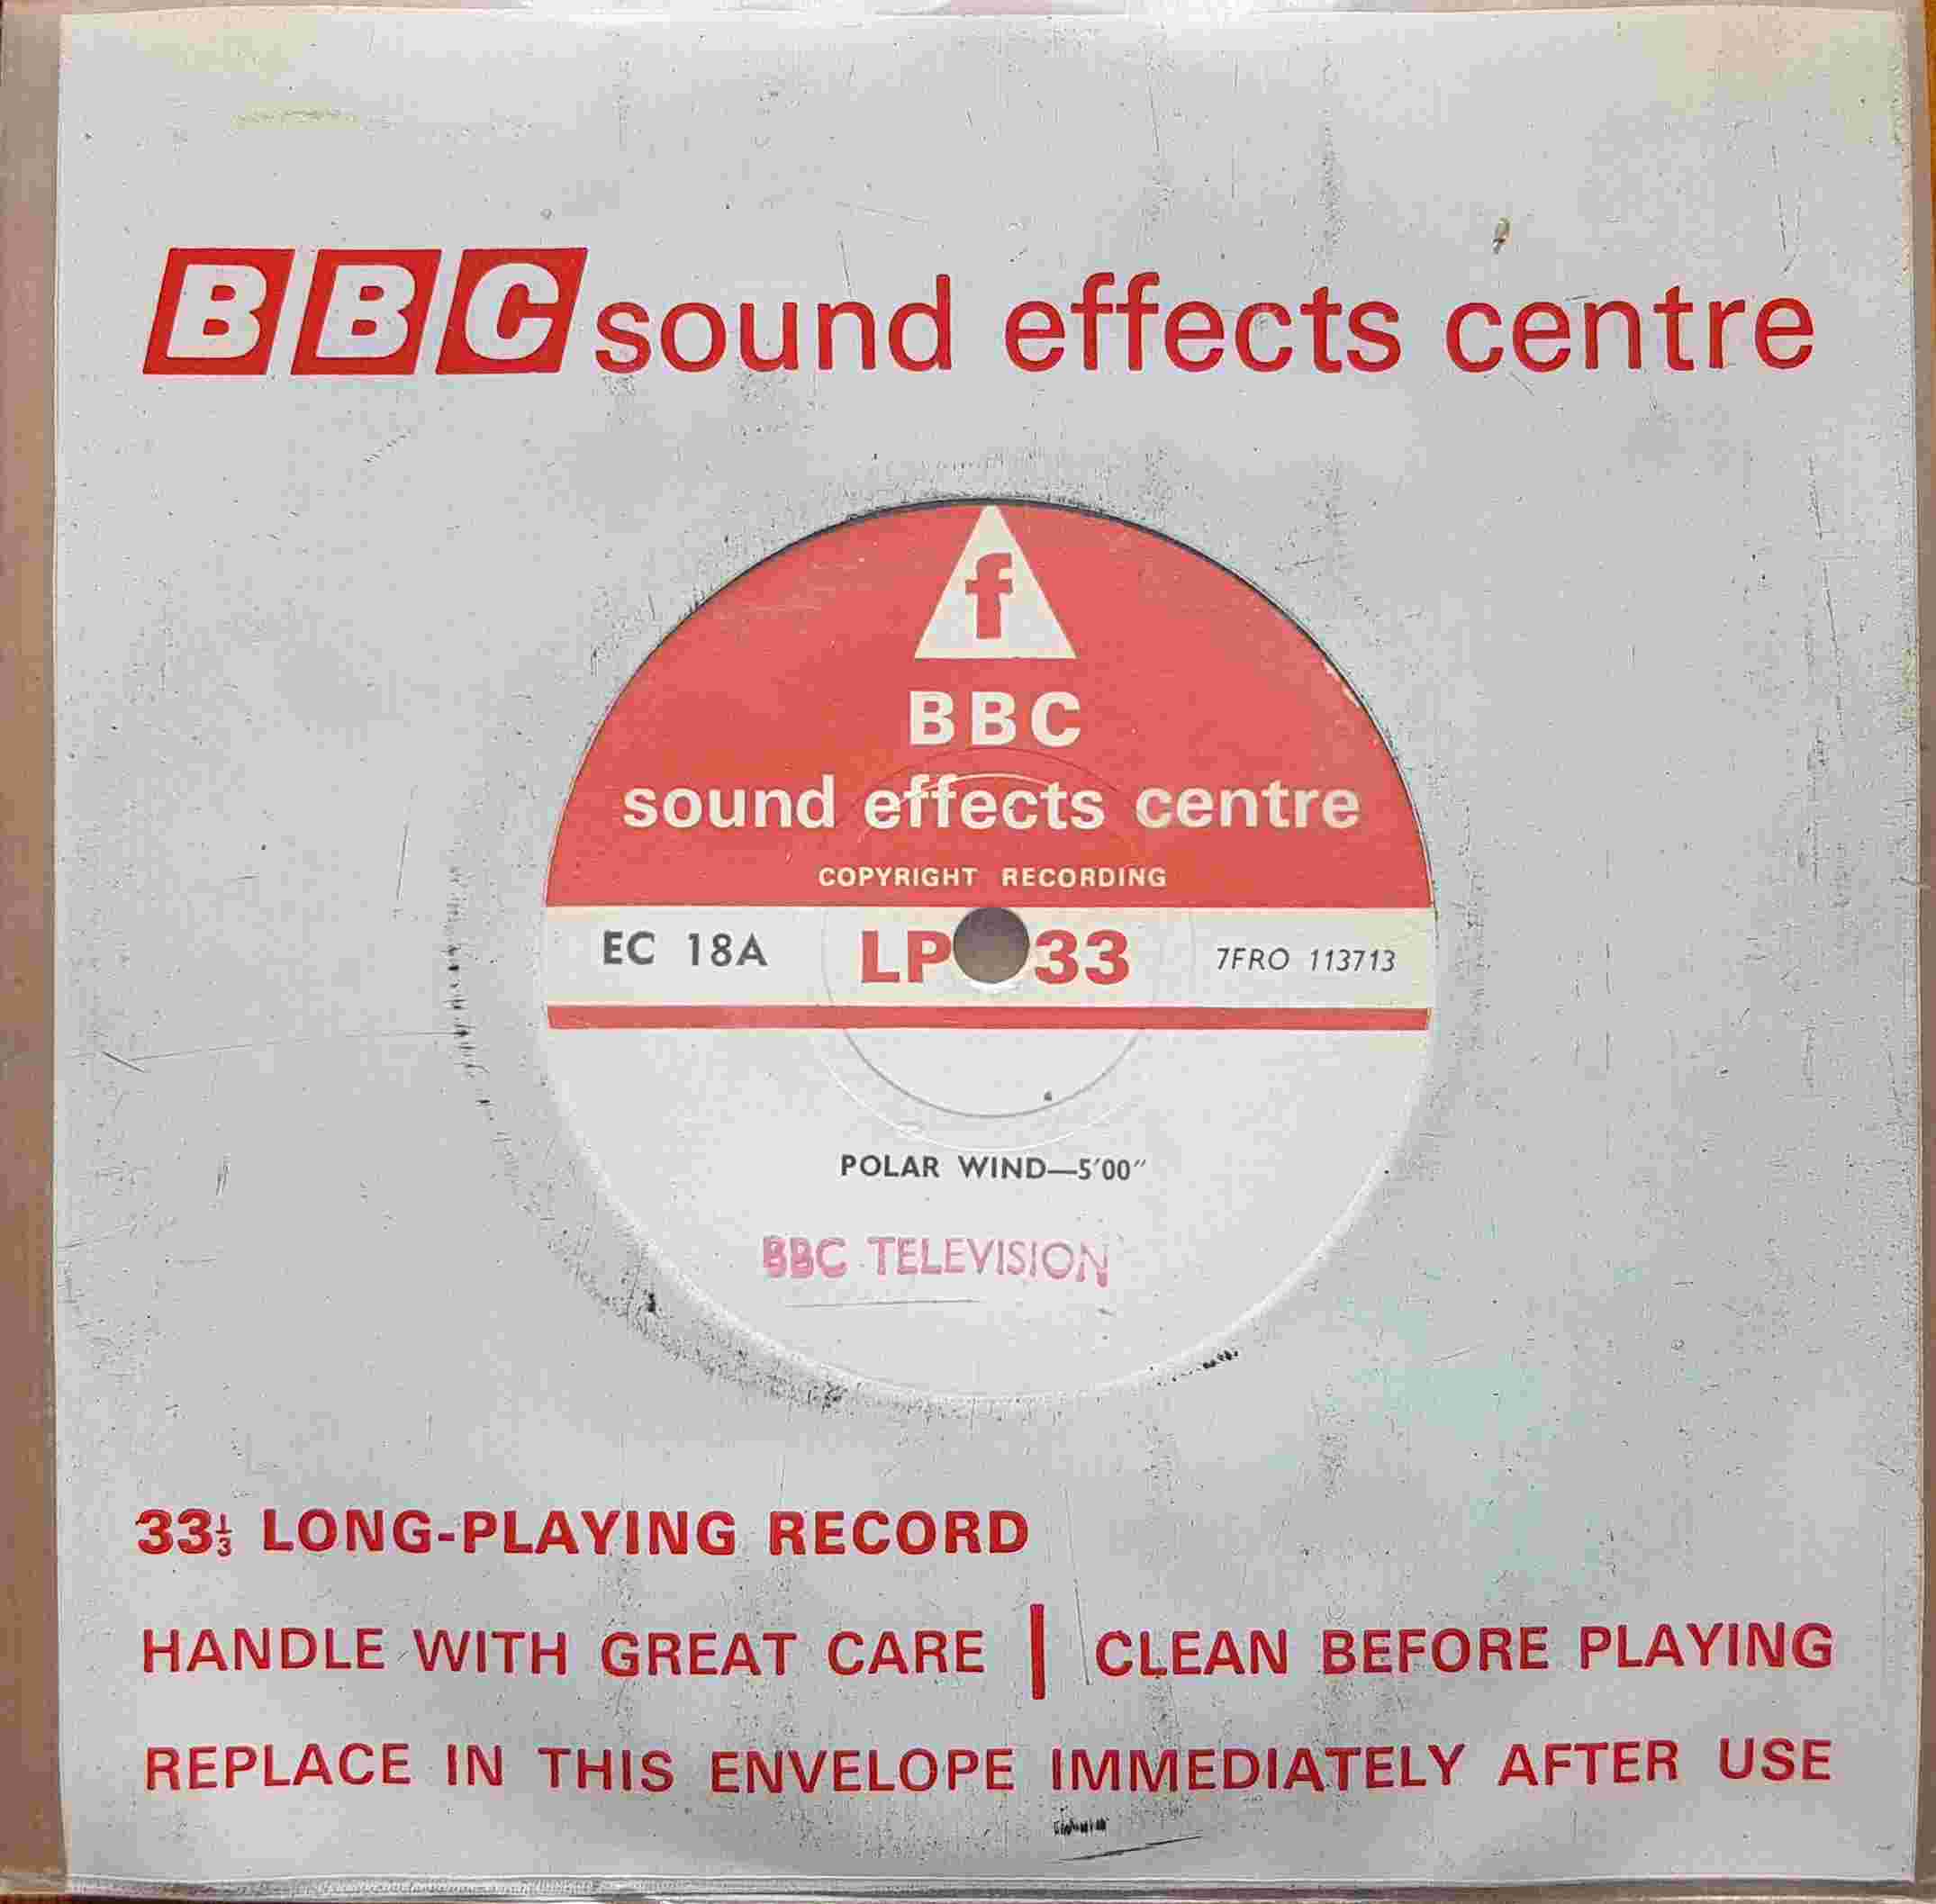 Picture of EC 18A Wind by artist Not registered from the BBC records and Tapes library